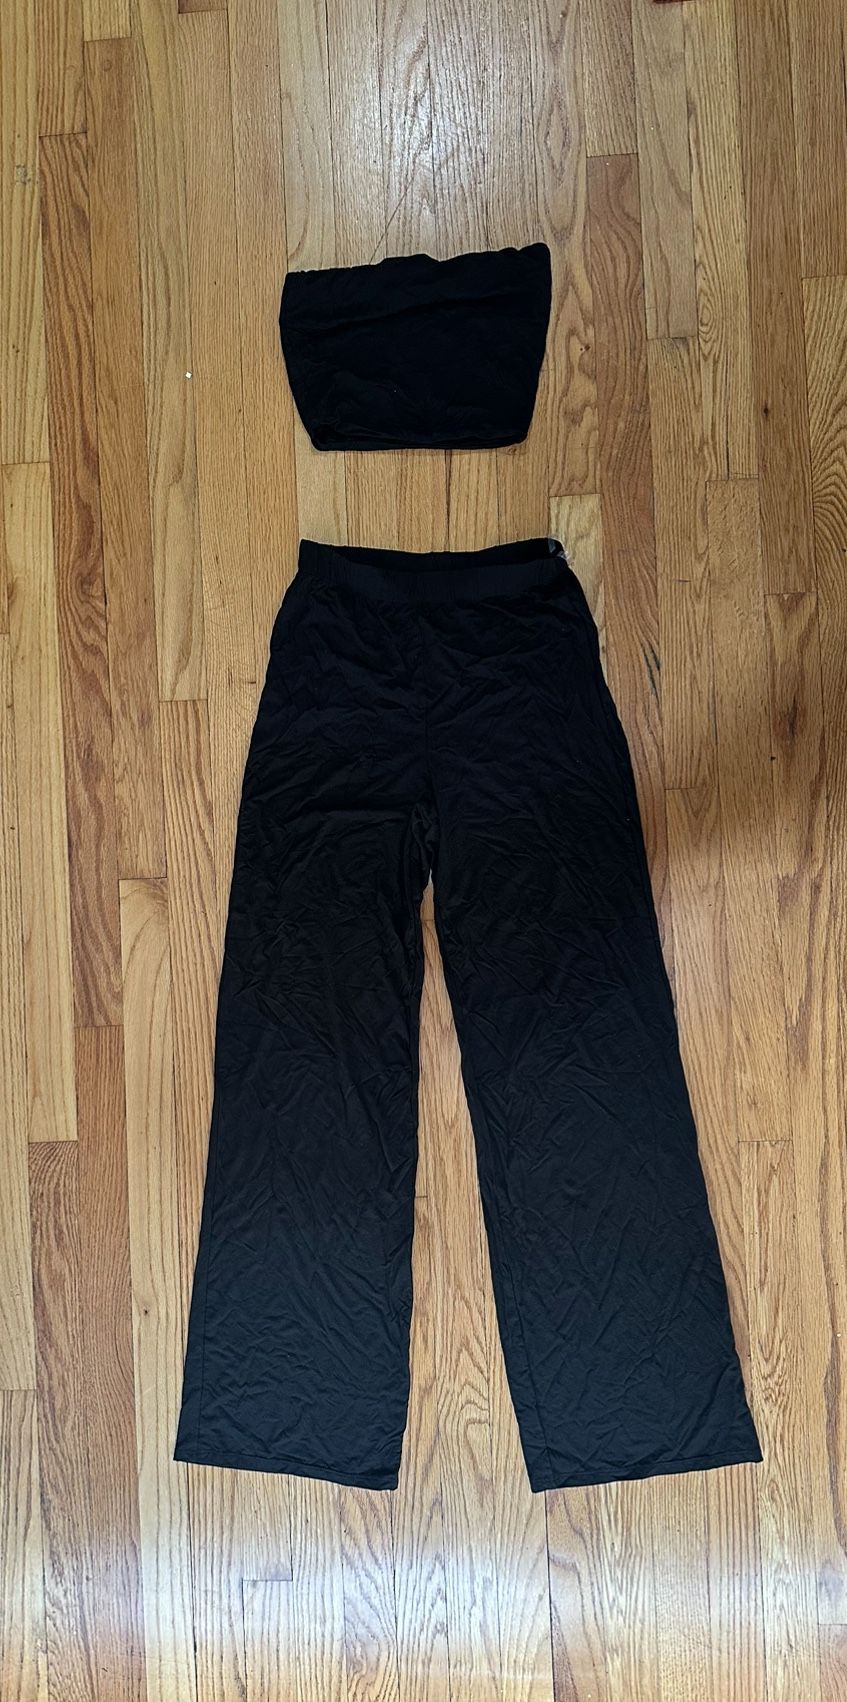 Two Piece Set New Never Worn 